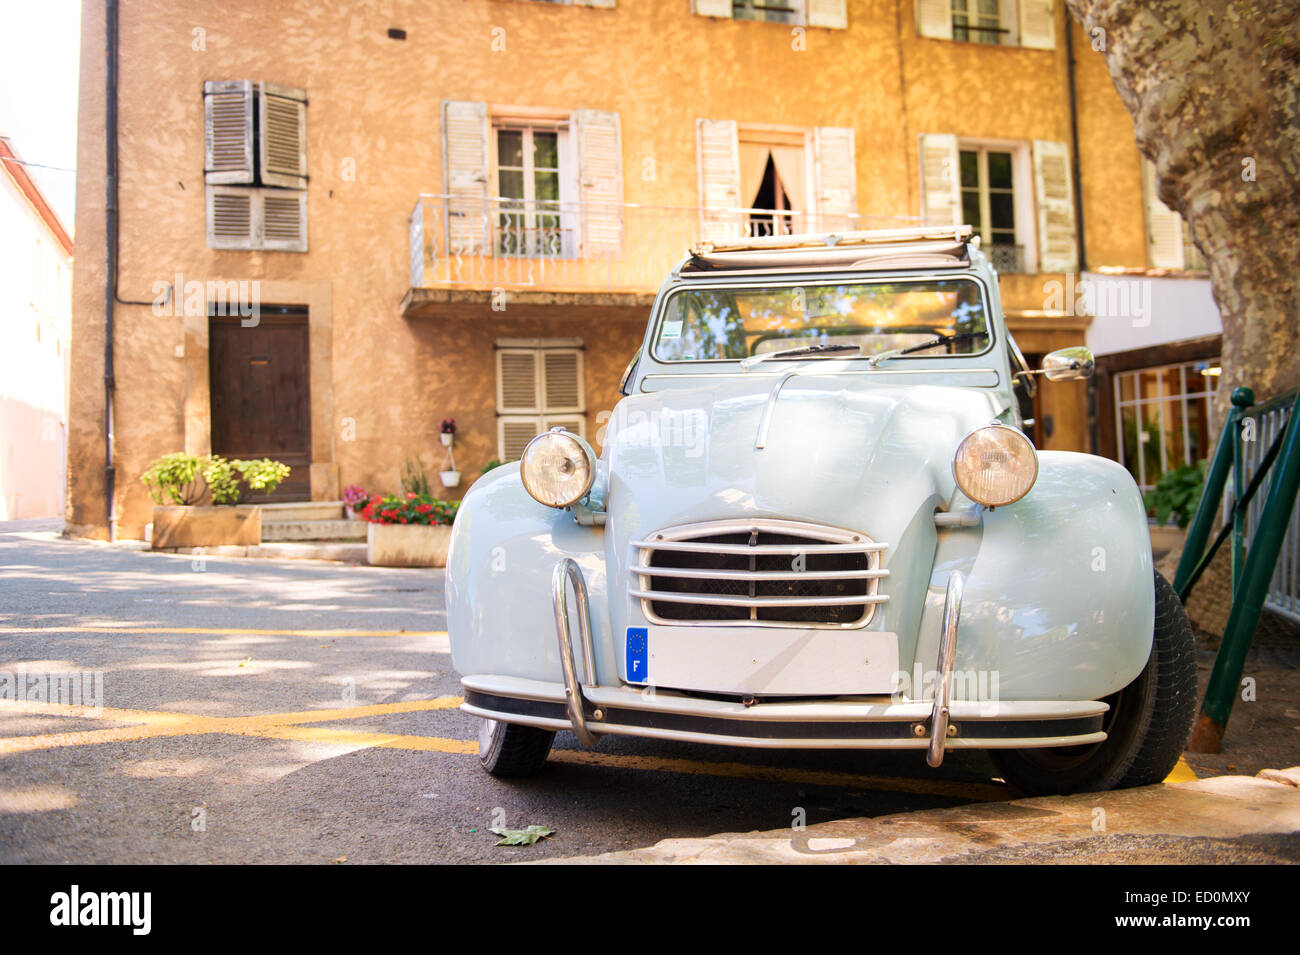 Romantic square with typical lavender blue French car Stock Photo